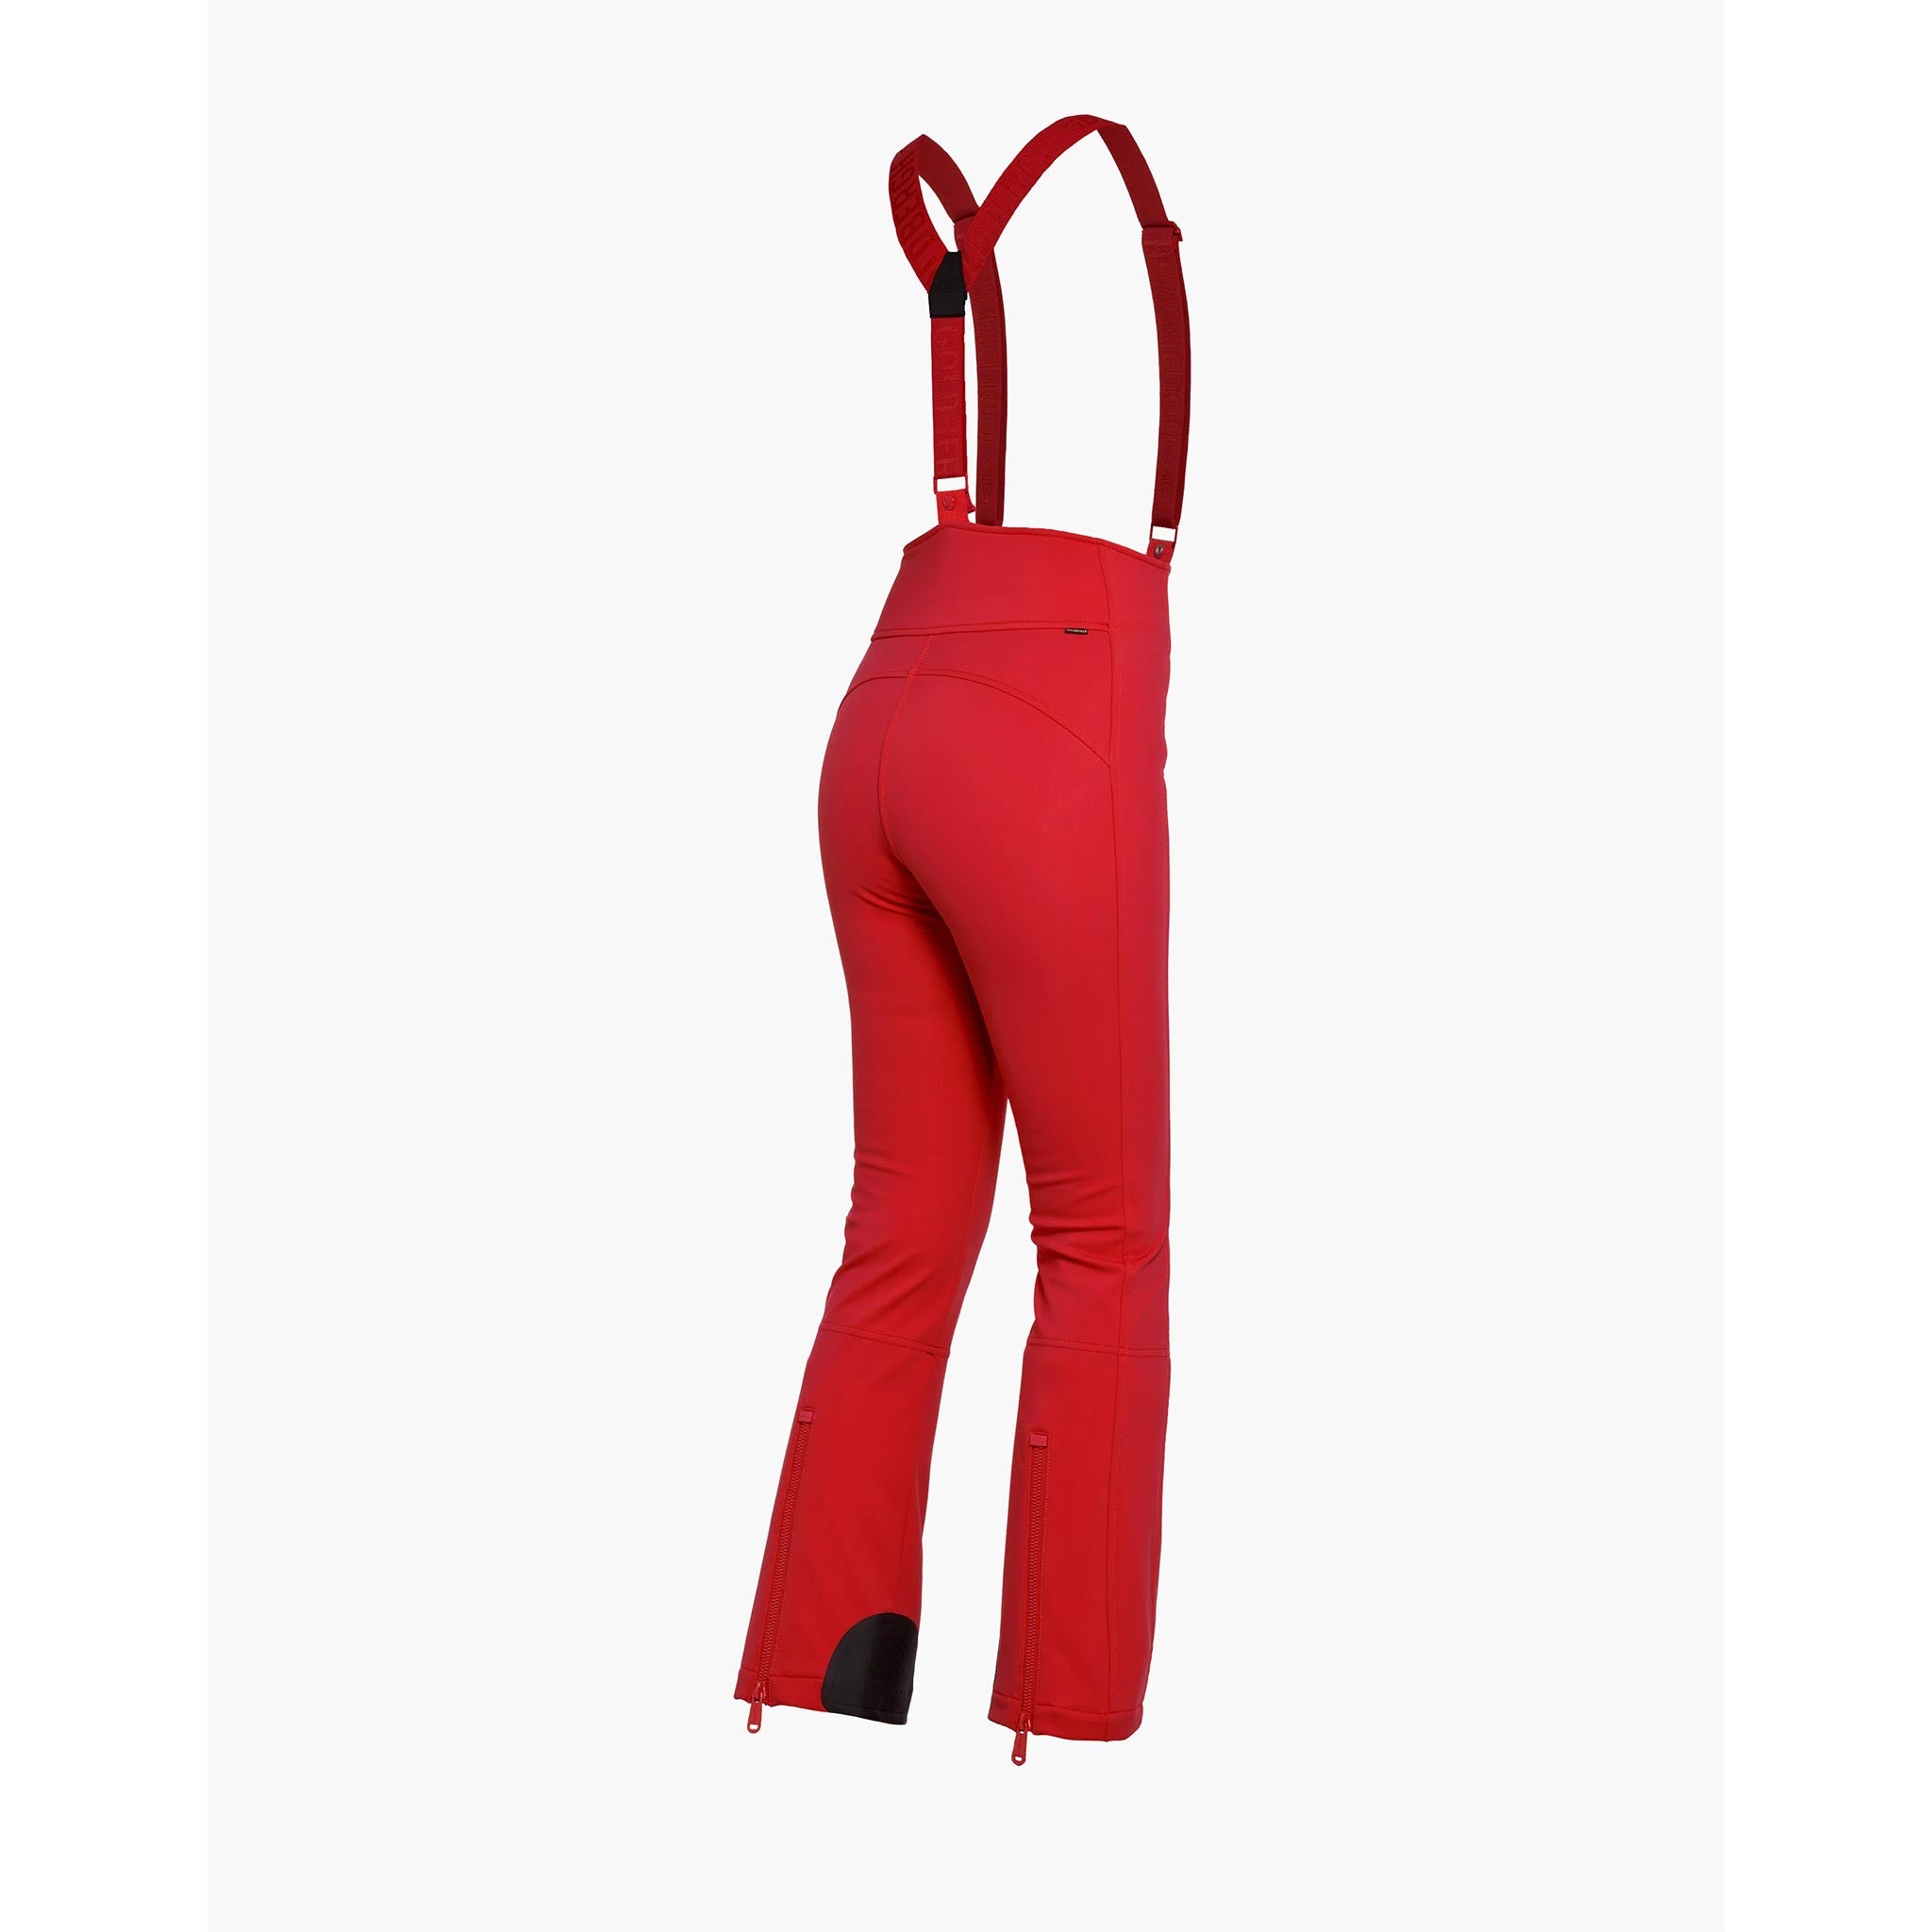 High End Ski Pants in Flame Red